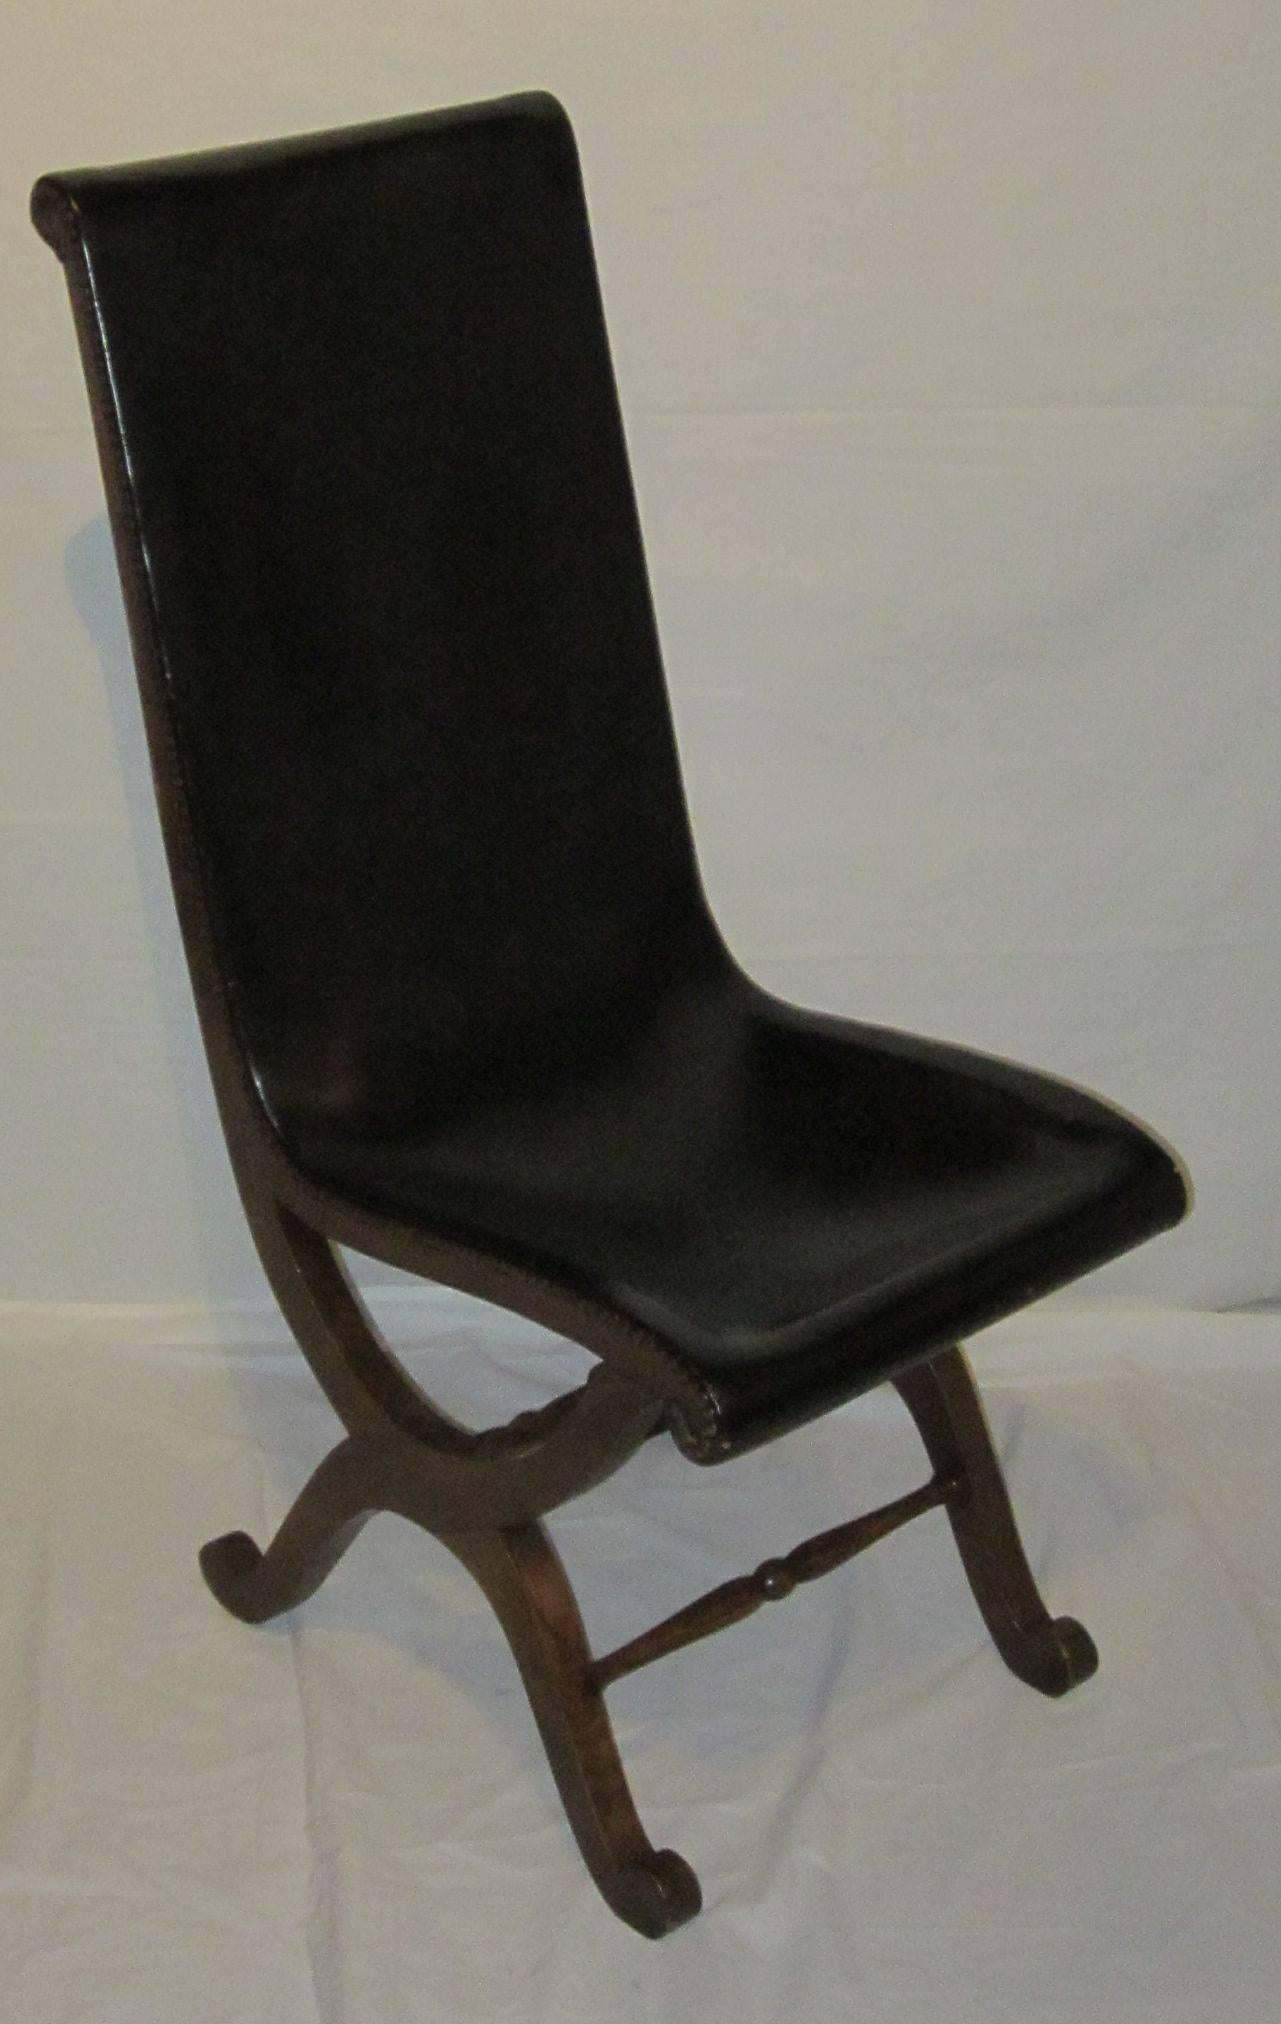 1940s Spanish set of six black leather dining chairs by designer Valenti.
Wood frame and legs, nailhead accents.
Very rare to find a set of six leather Valenti dining chairs in excellent condition.
 